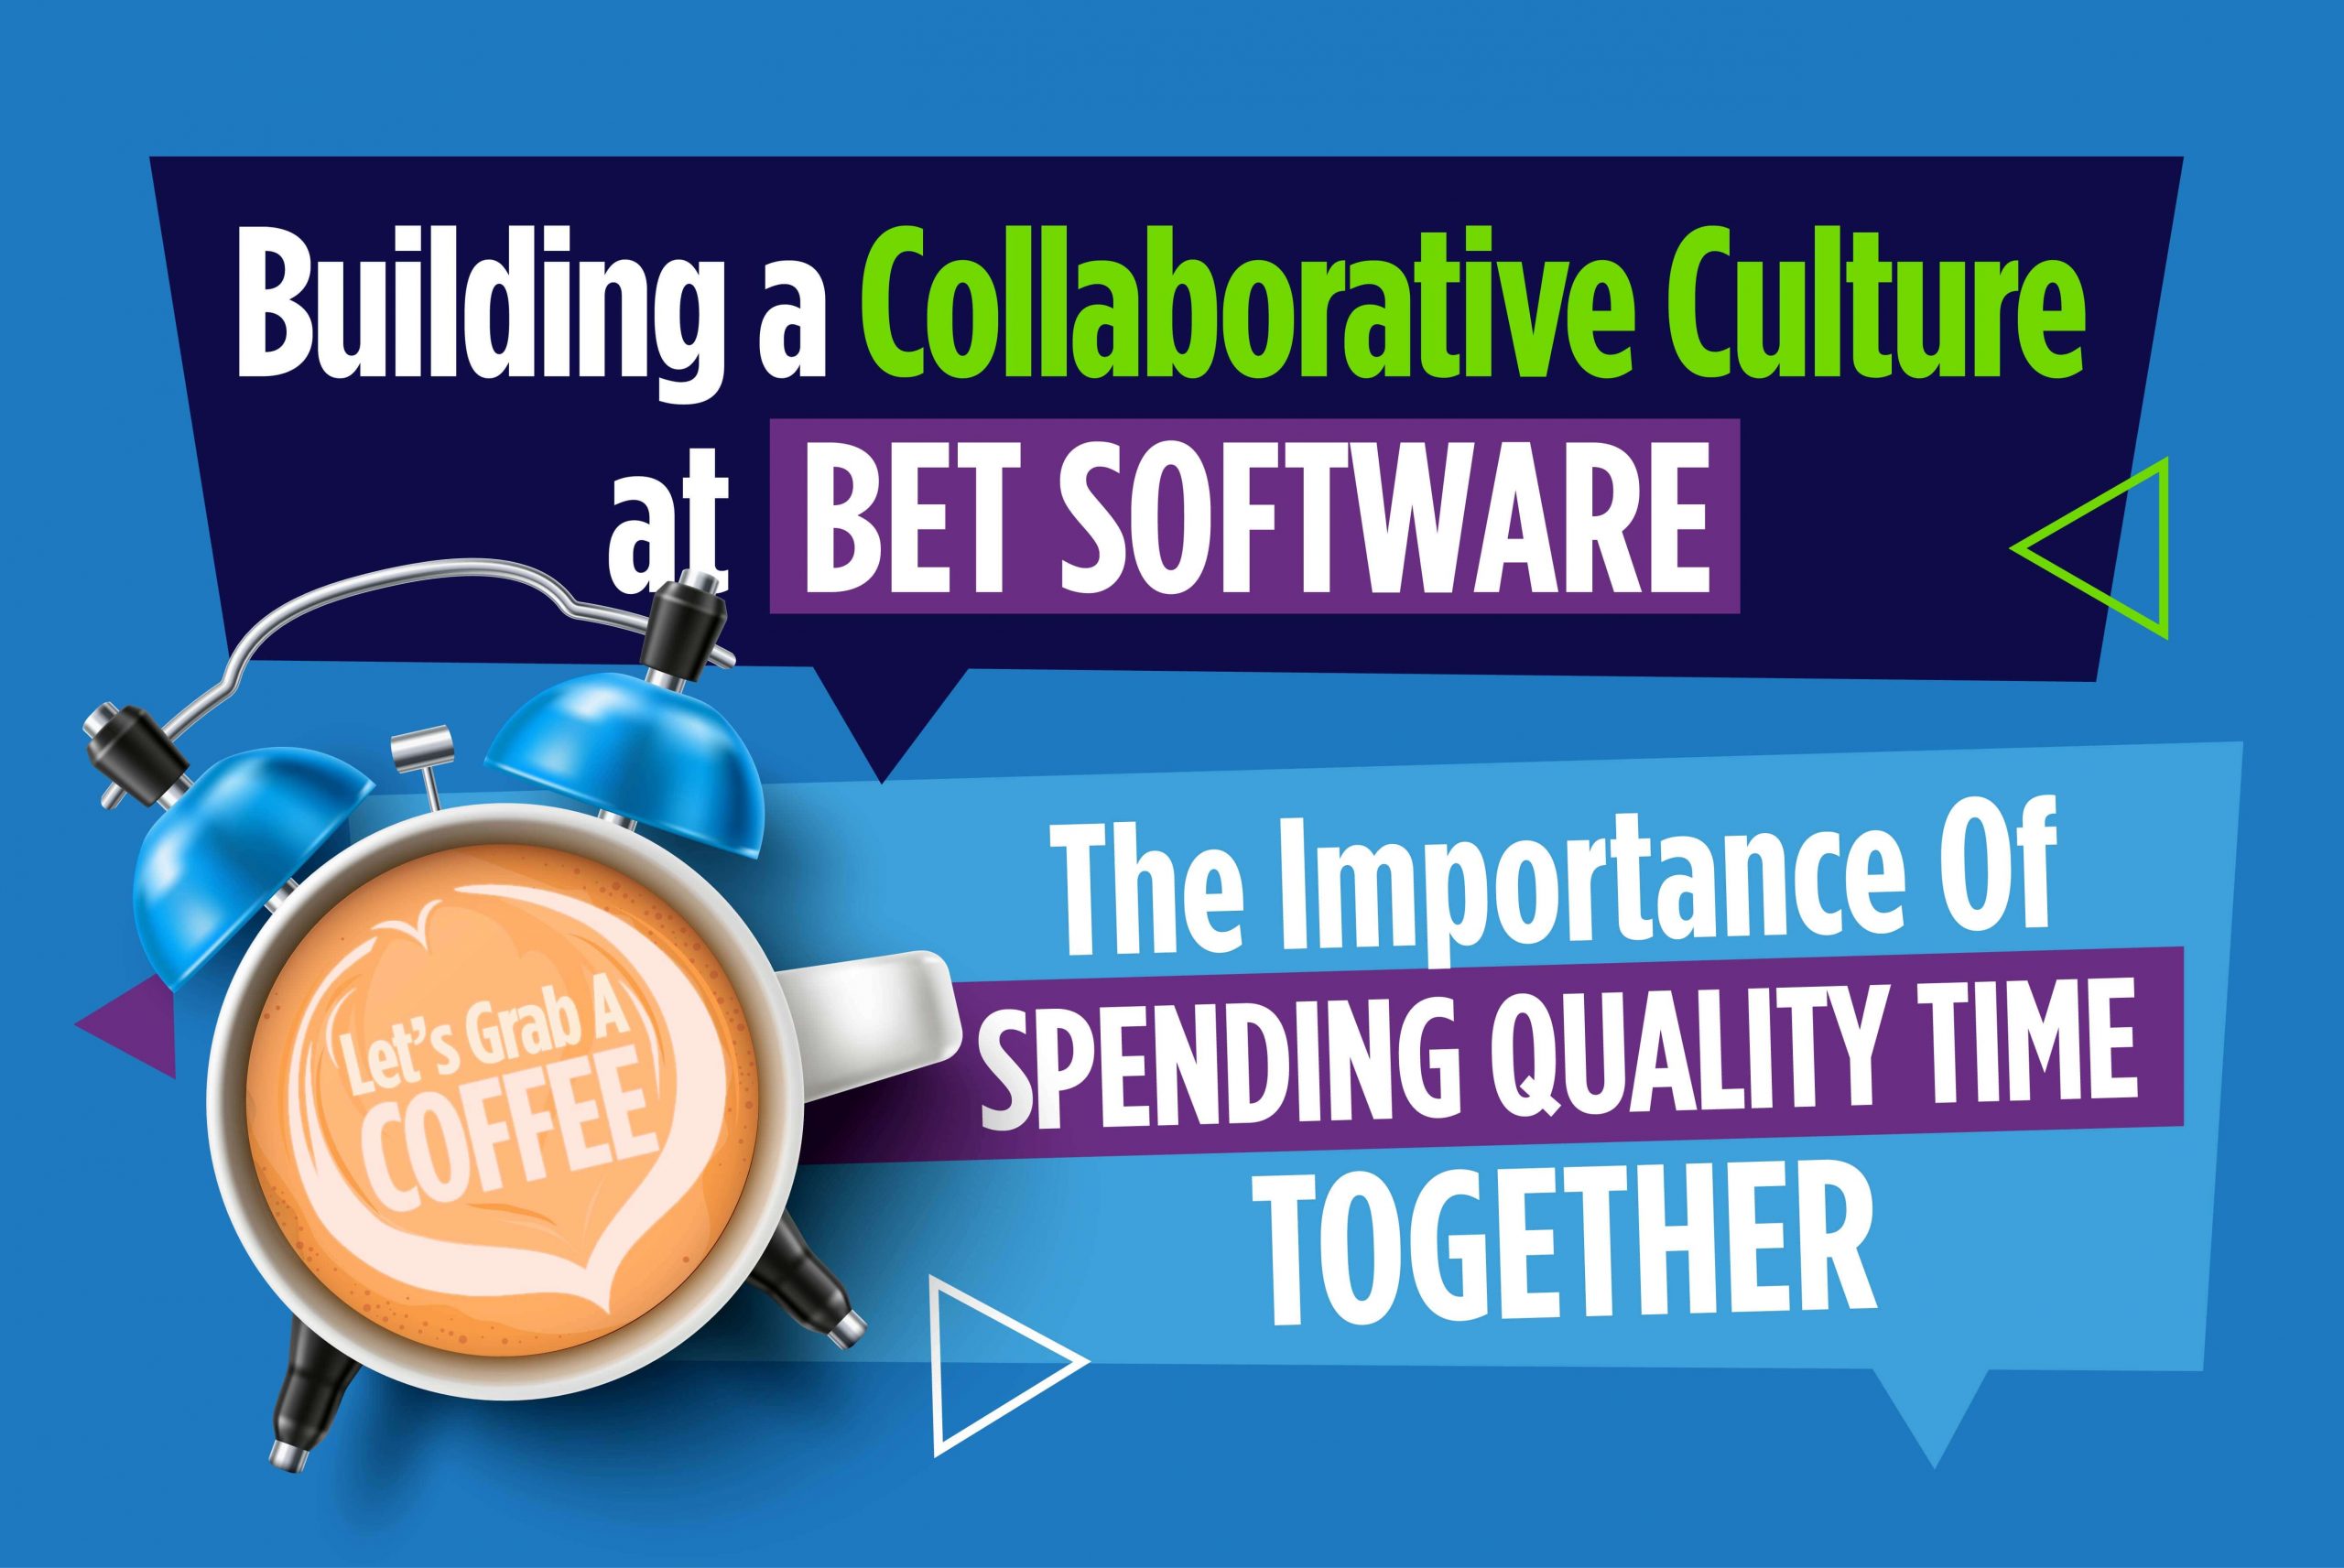 Building a Collaborative Culture at BET Software - The Importance of Spending Quality Time Together